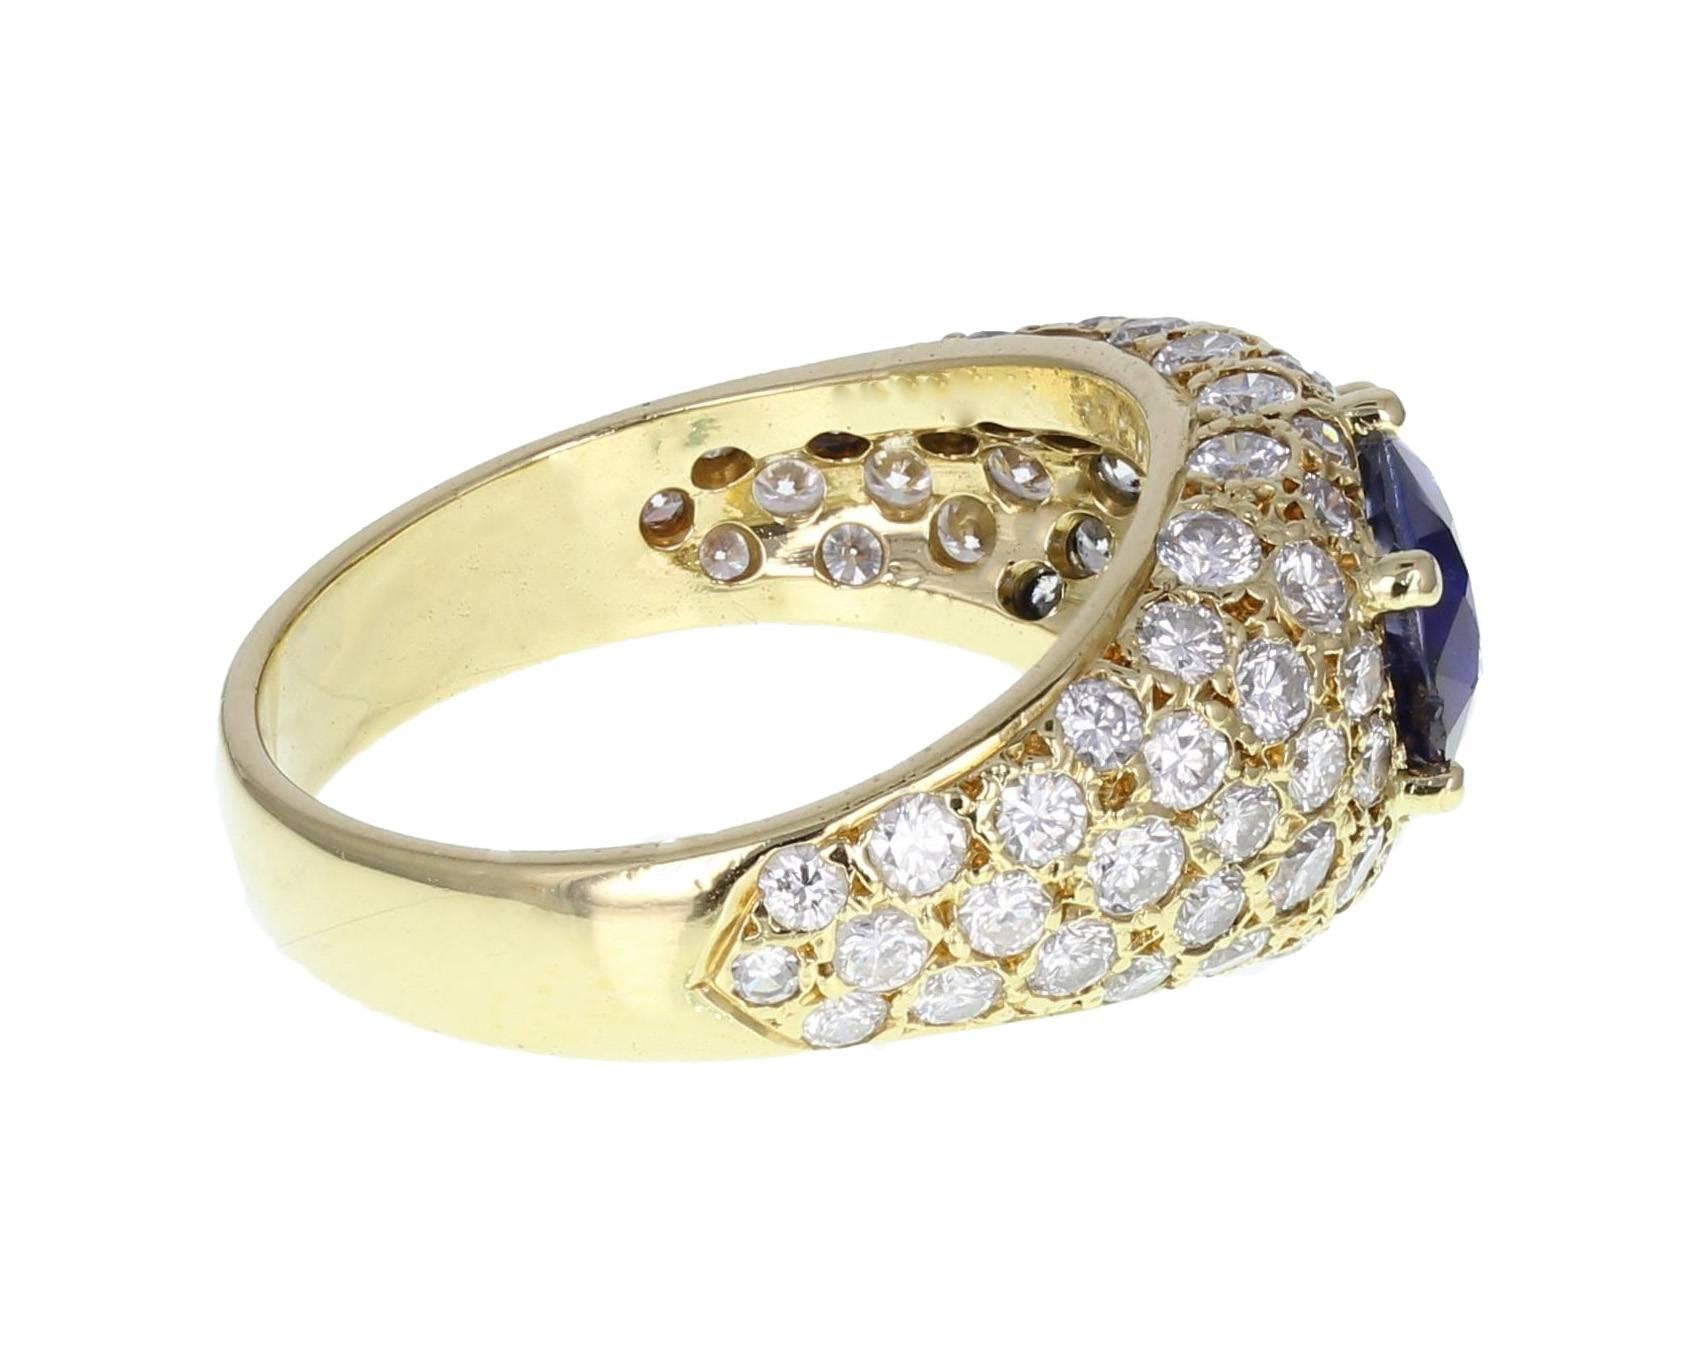 Central oval-cut sapphire of beautiful rich blue colour set in six yellow gold claws, flanked by a tapering shank, pavé set with round, brilliant-cut diamonds.
Specifications:
 
Shank and Setting
Tests as 18ct gold
 
Diamond
Weight: 1.25ct in